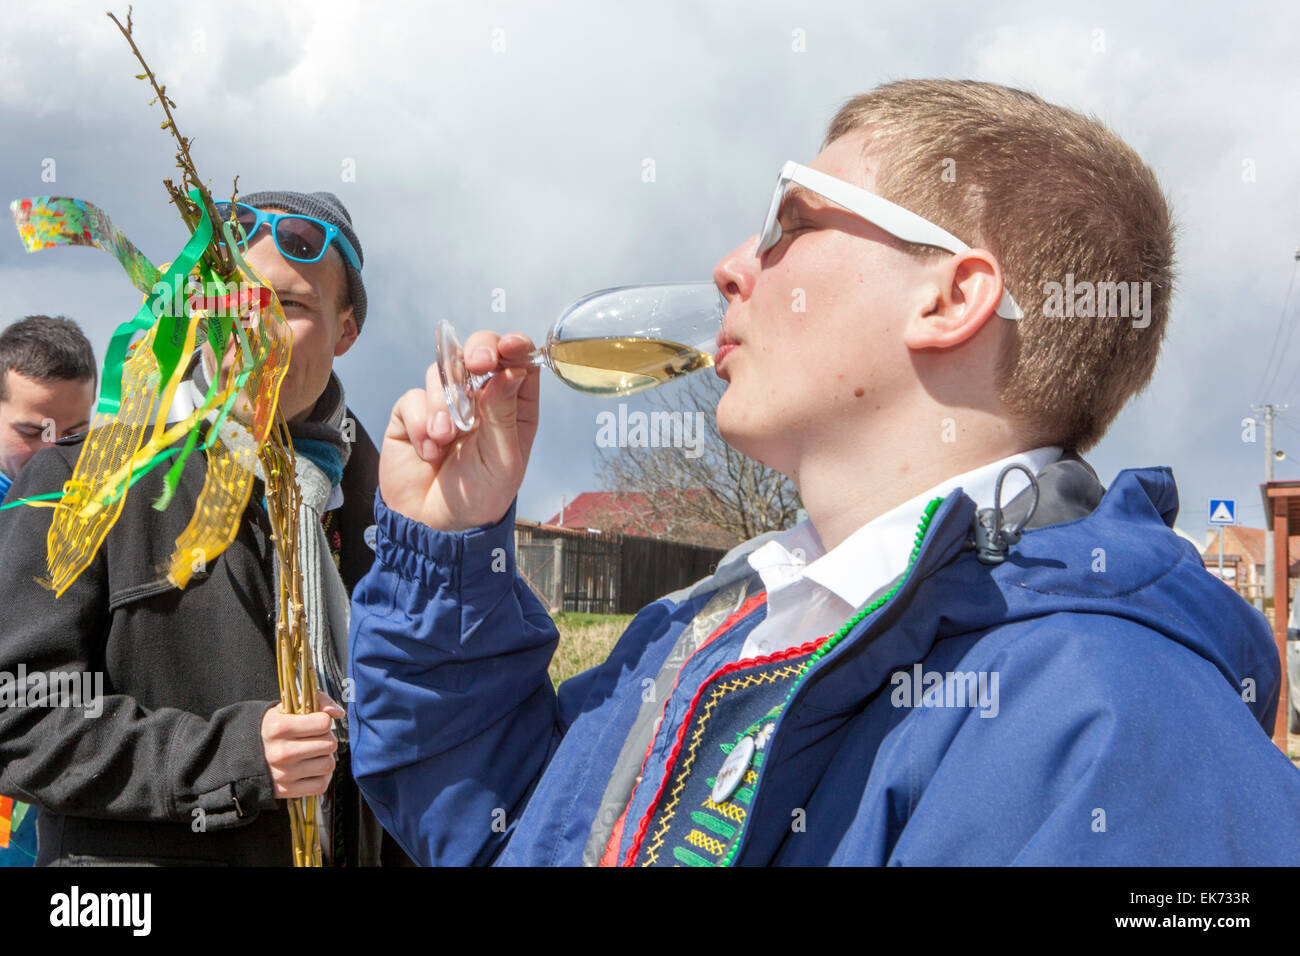 Easter Monday - young boys passes through the village with a whip, whipping girls, Sakvice,drinks wine, Moravia, Czech Republic Stock Photo